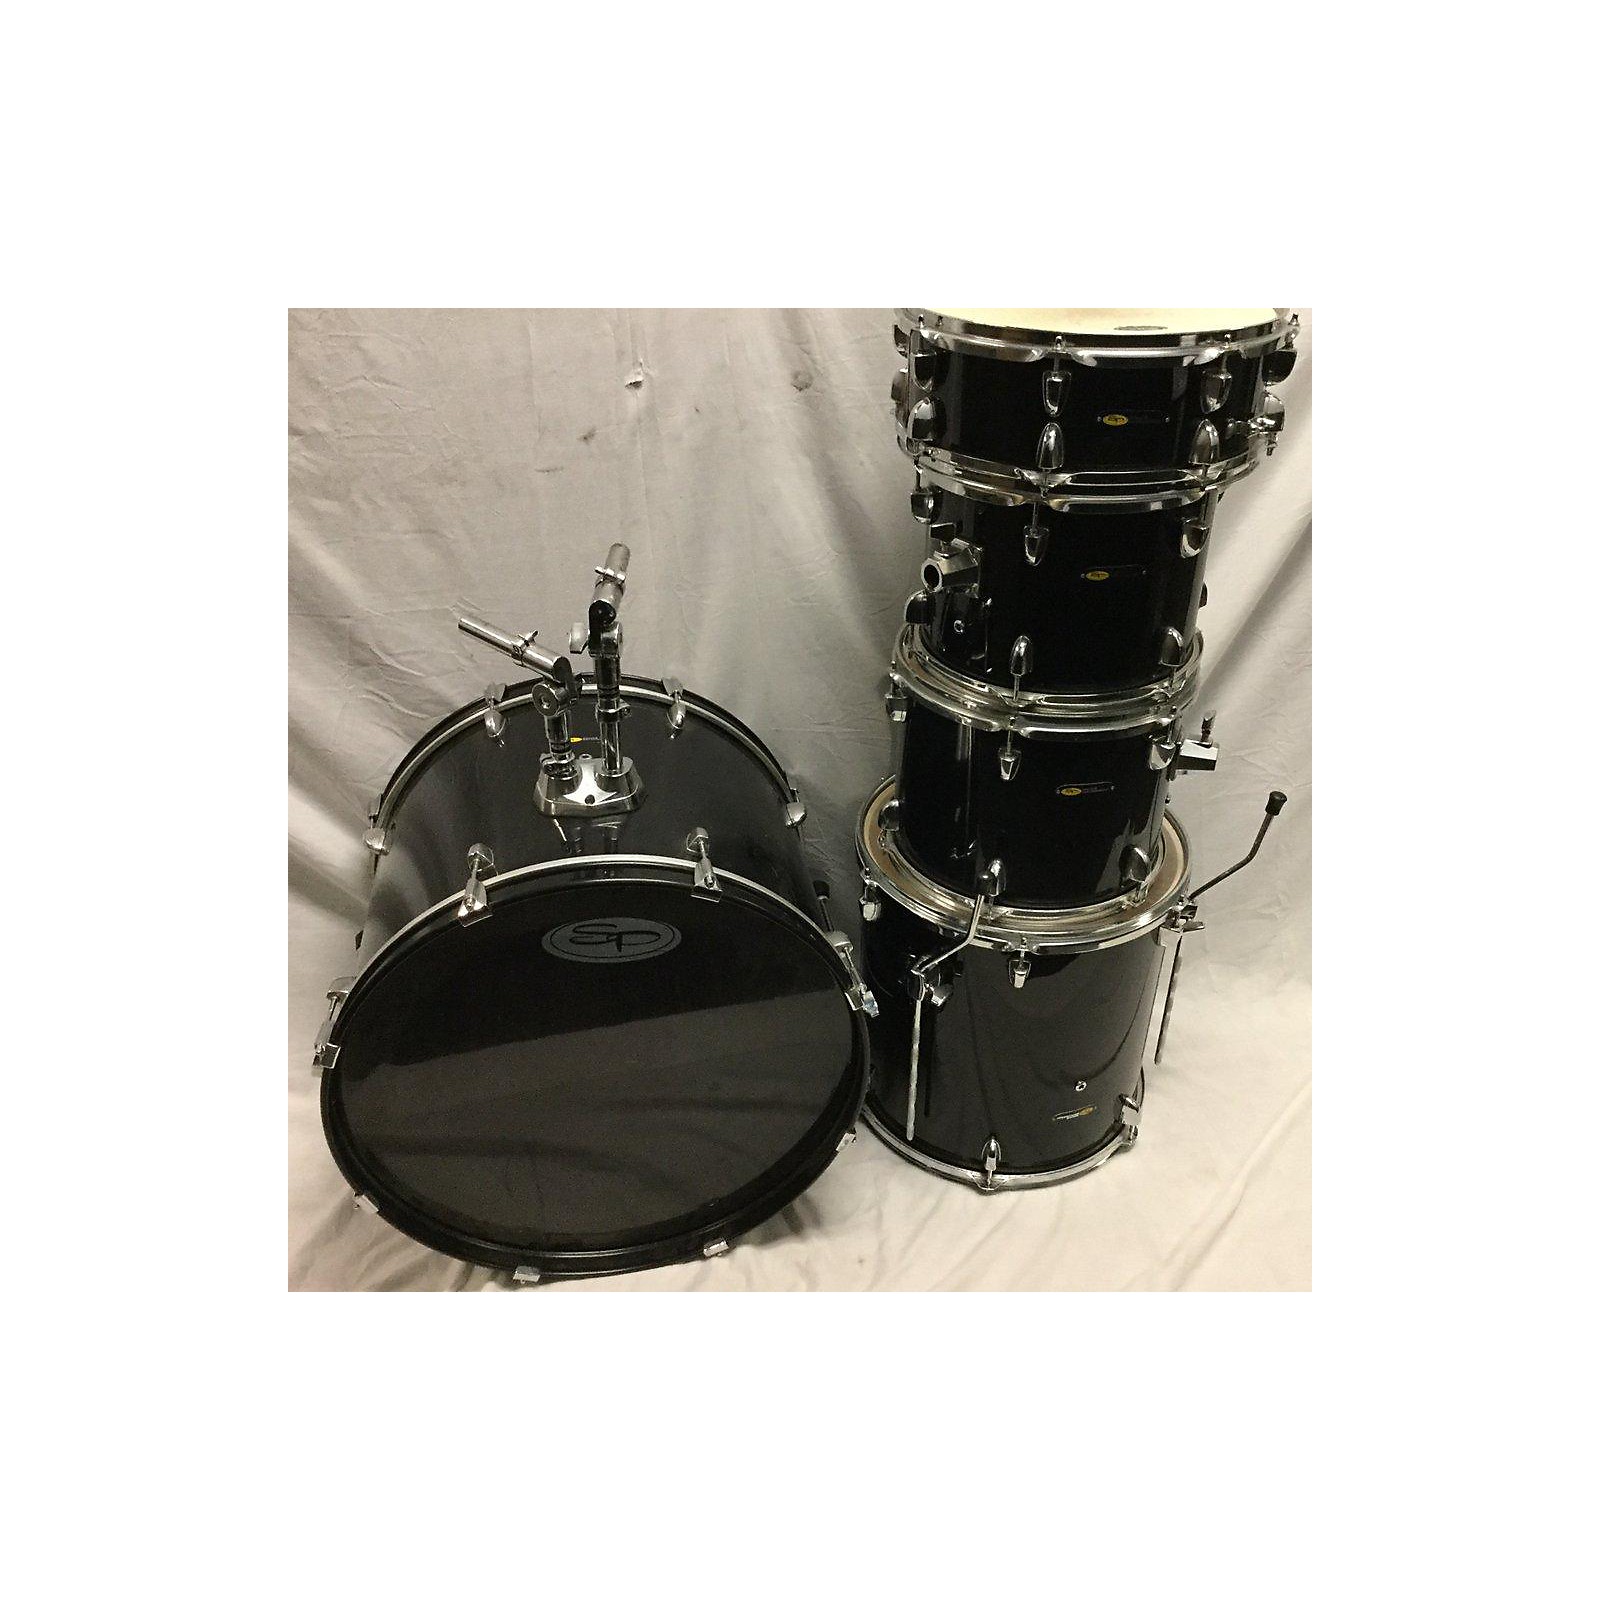 Used Sound Percussion Labs Sp2bk Drum Kit Black Musician S Friend